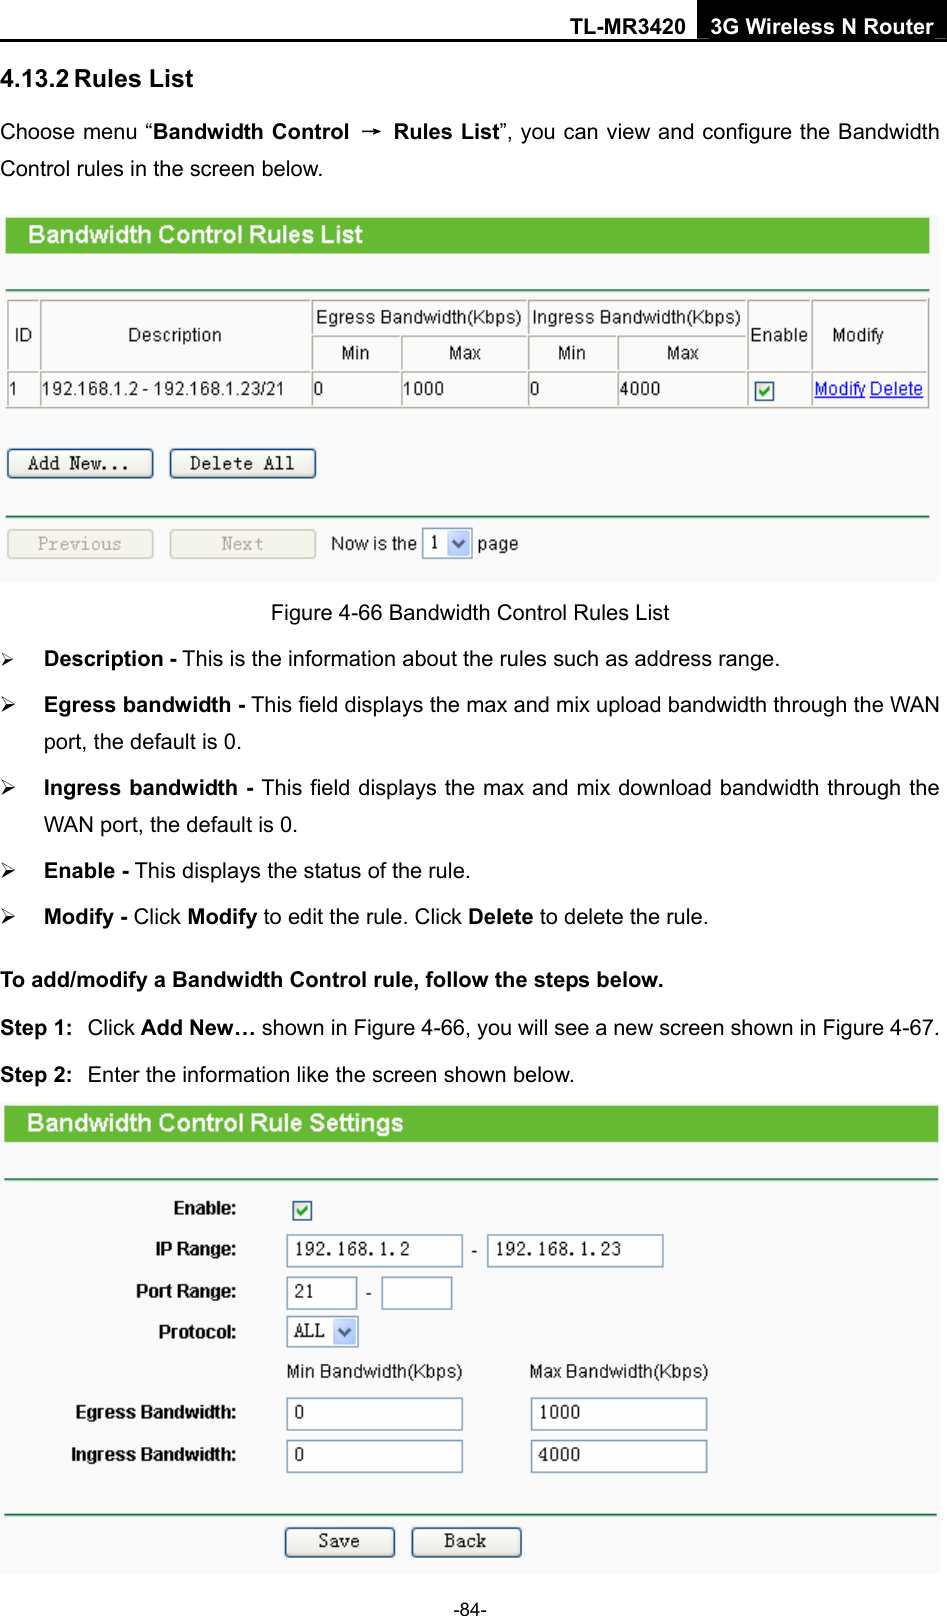 TL-MR3420 3G Wireless N Router -84- 4.13.2 Rules List Choose menu “Bandwidth Control → Rules List”, you can view and configure the Bandwidth Control rules in the screen below.  Figure 4-66 Bandwidth Control Rules List ¾ Description - This is the information about the rules such as address range. ¾ Egress bandwidth - This field displays the max and mix upload bandwidth through the WAN port, the default is 0. ¾ Ingress bandwidth - This field displays the max and mix download bandwidth through the WAN port, the default is 0. ¾ Enable - This displays the status of the rule. ¾ Modify - Click Modify to edit the rule. Click Delete to delete the rule. To add/modify a Bandwidth Control rule, follow the steps below. Step 1:  Click Add New… shown in Figure 4-66, you will see a new screen shown in Figure 4-67. Step 2:  Enter the information like the screen shown below.  